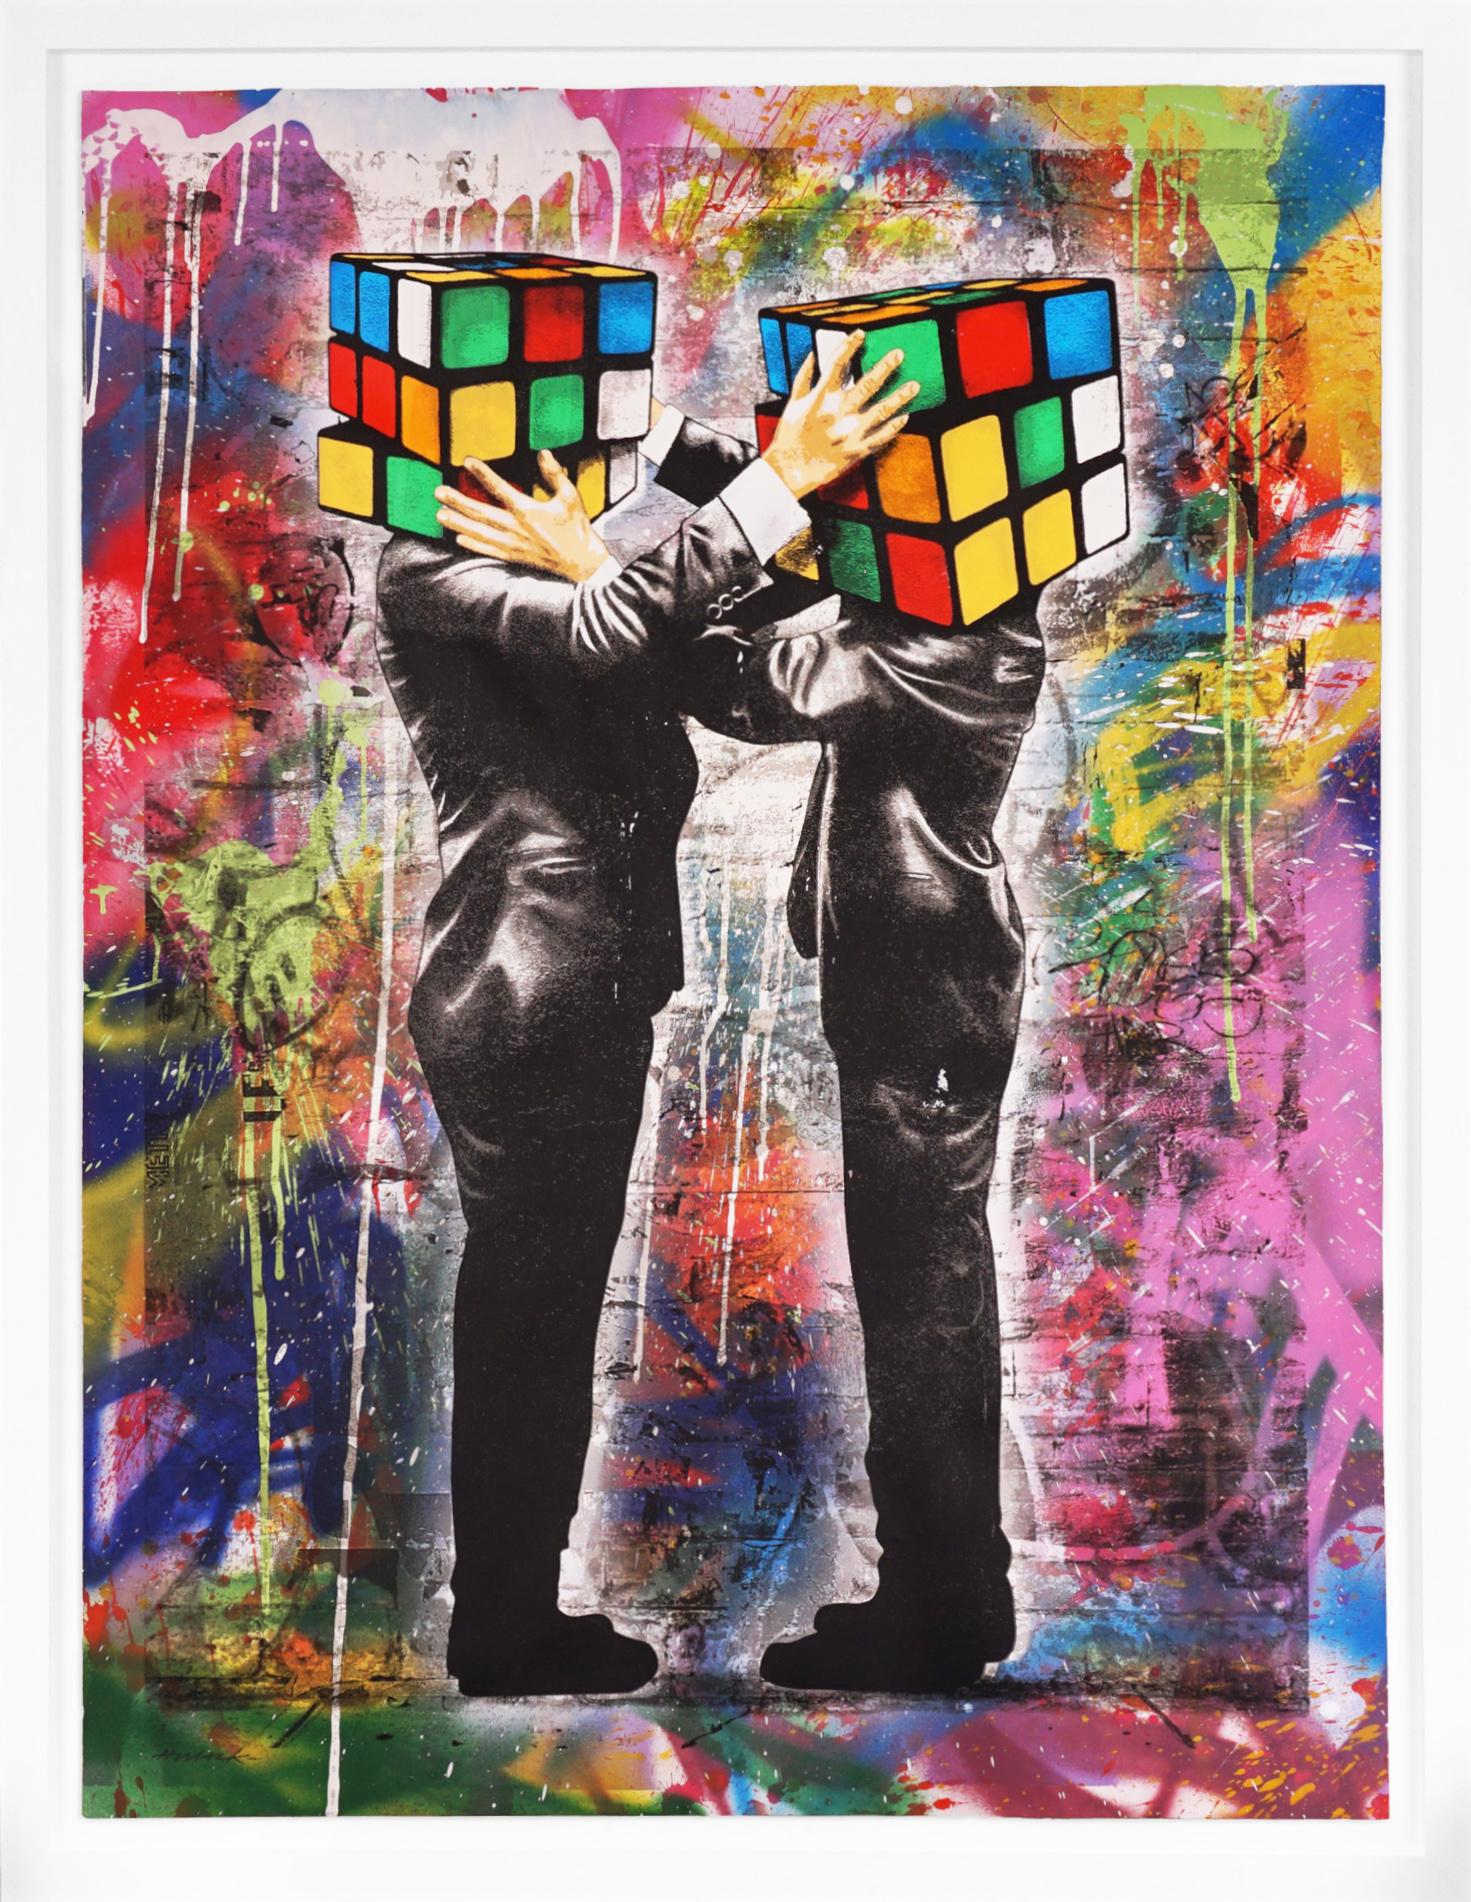 The bright pop-art ‘Puzzled III' is a unique stencil, silkscreen, painting on paper by contemporary art prodigy and street-artist, Hijack. The street pop-art piece reflects the political and cultural divide in today’s society with vivid primary